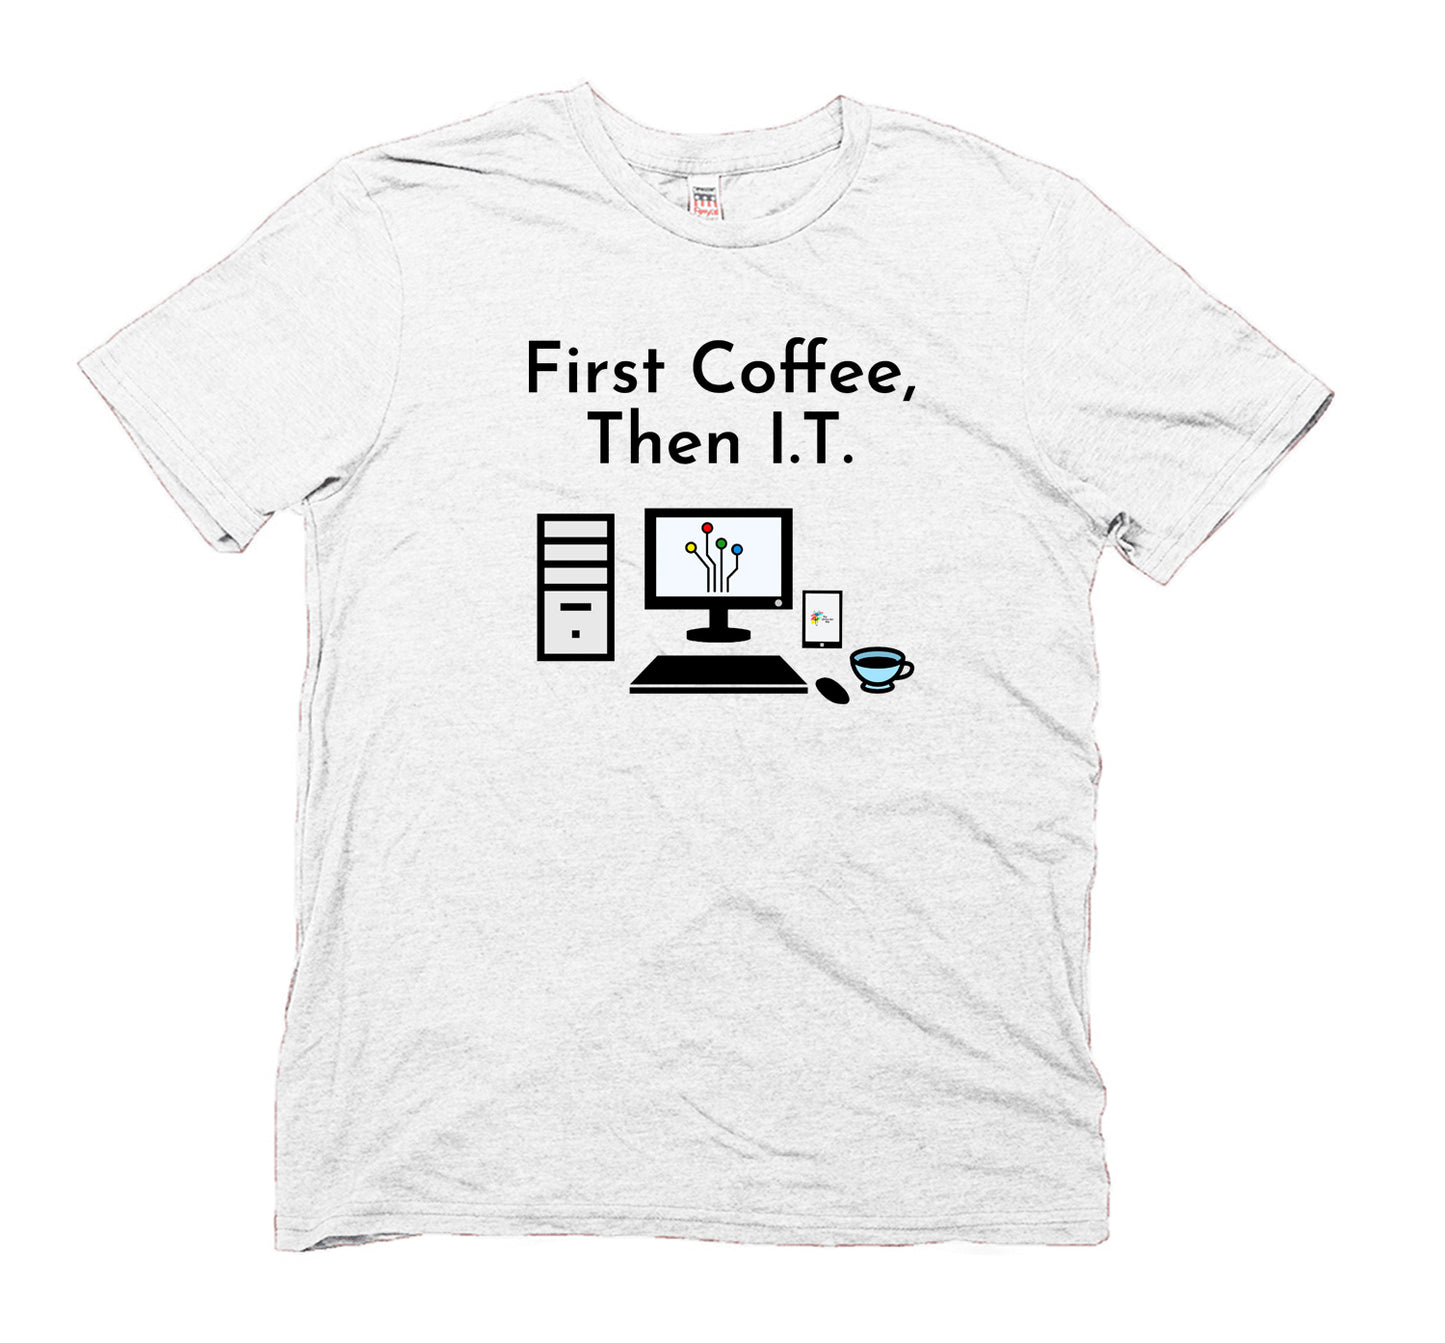 Information Technology T Shirt First Coffee Then I.T. by The Office Art Guy, white